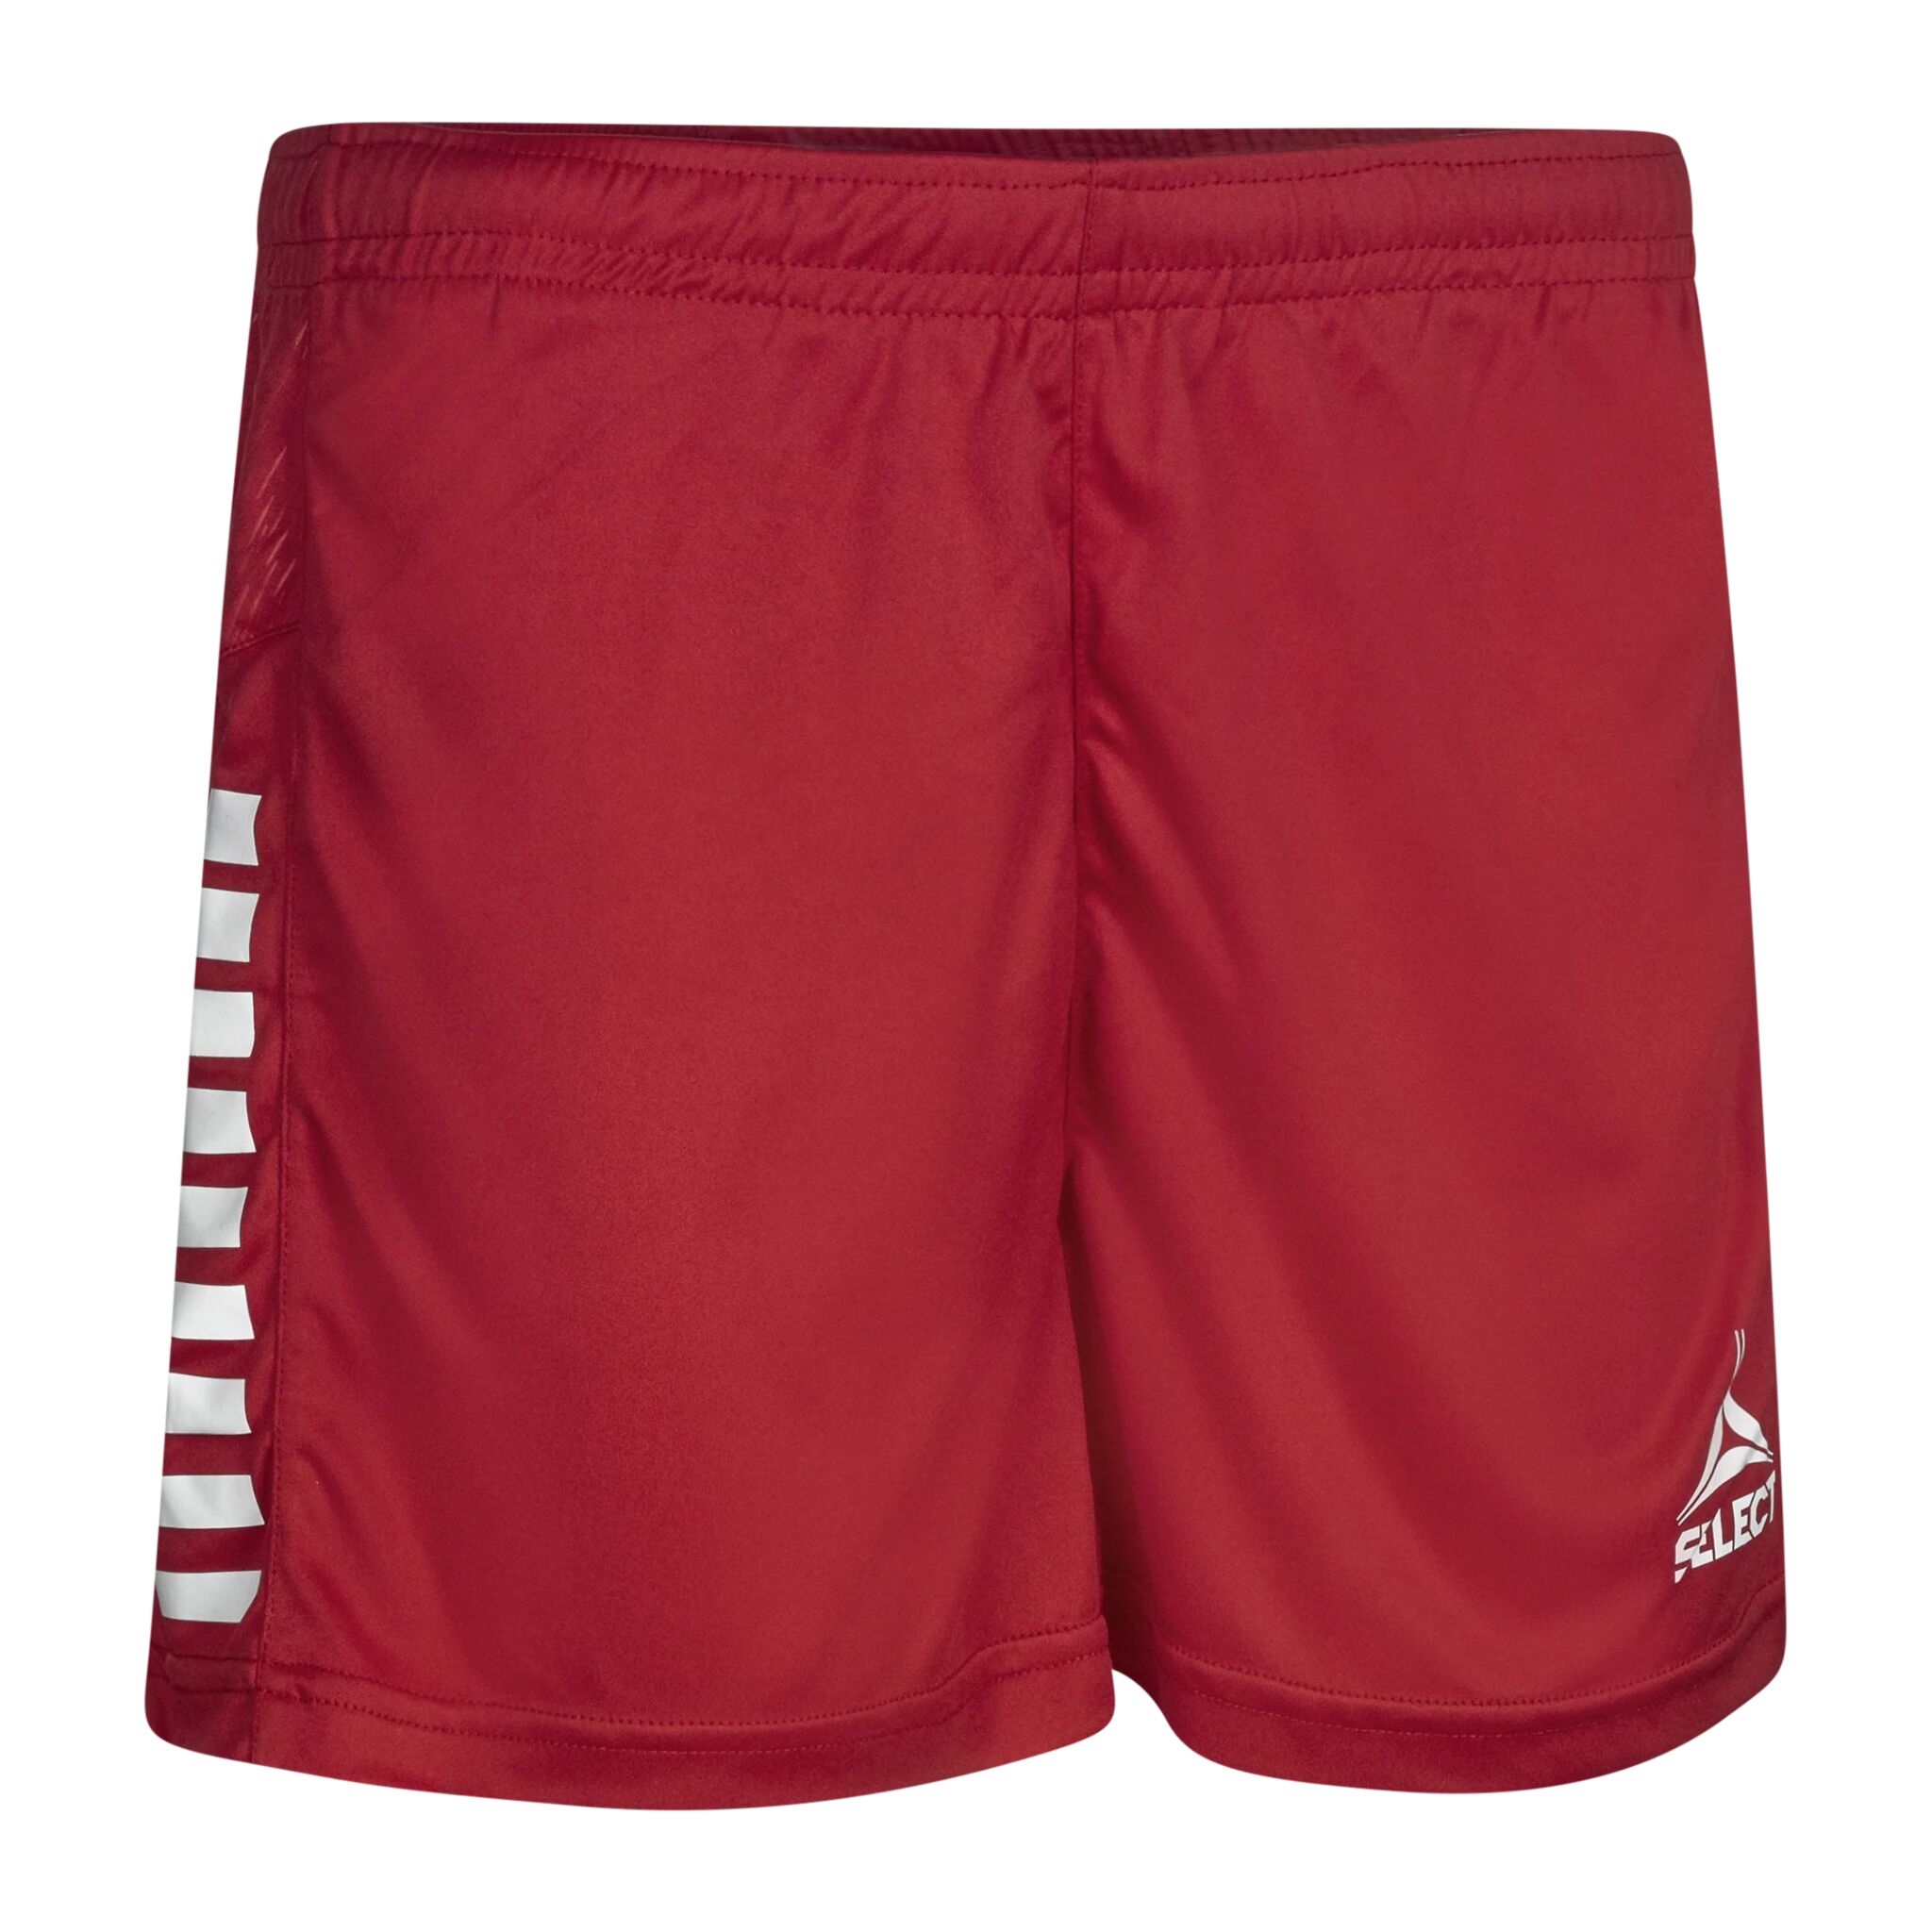 Select Player shorts Spain women, shorts dame M RED